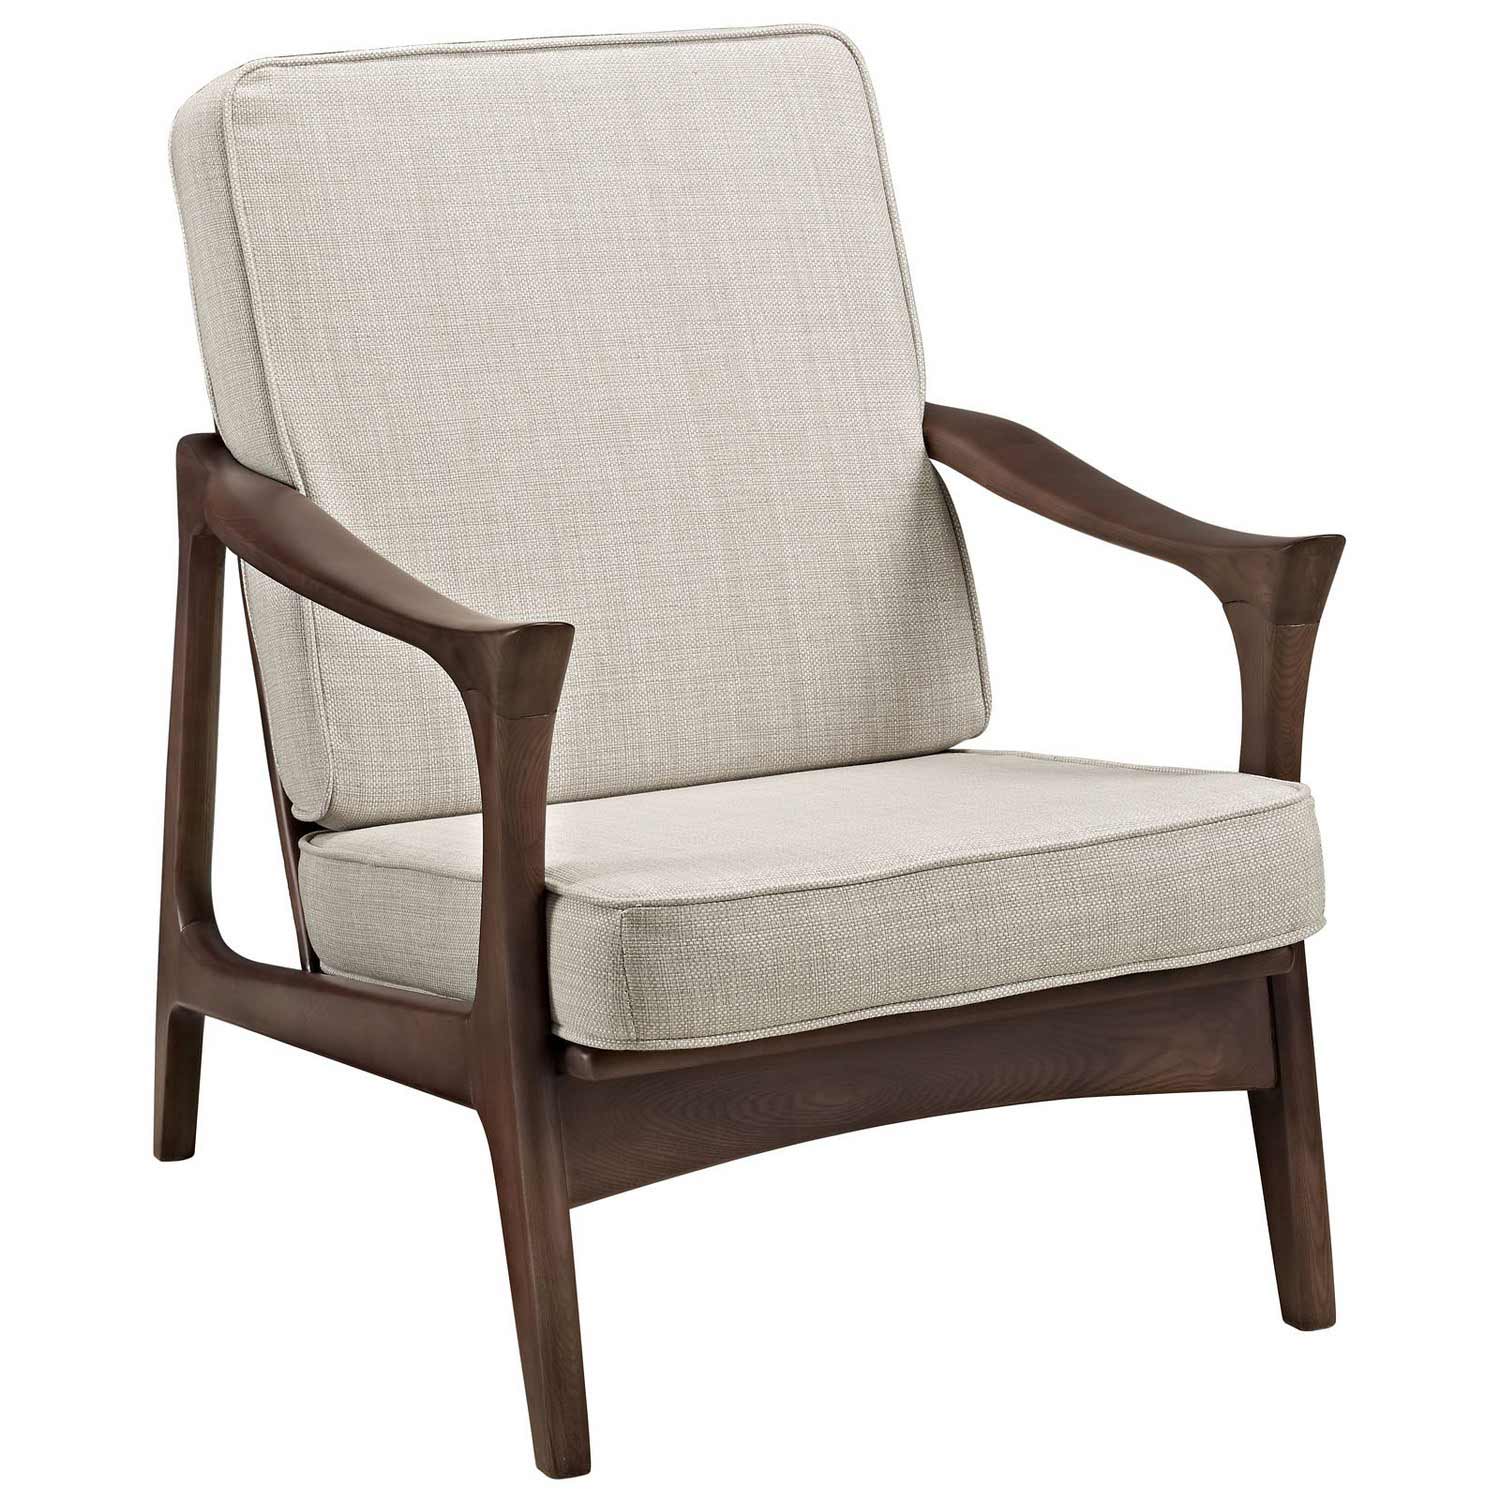 Modway Canoe Lounge Chair - Brown